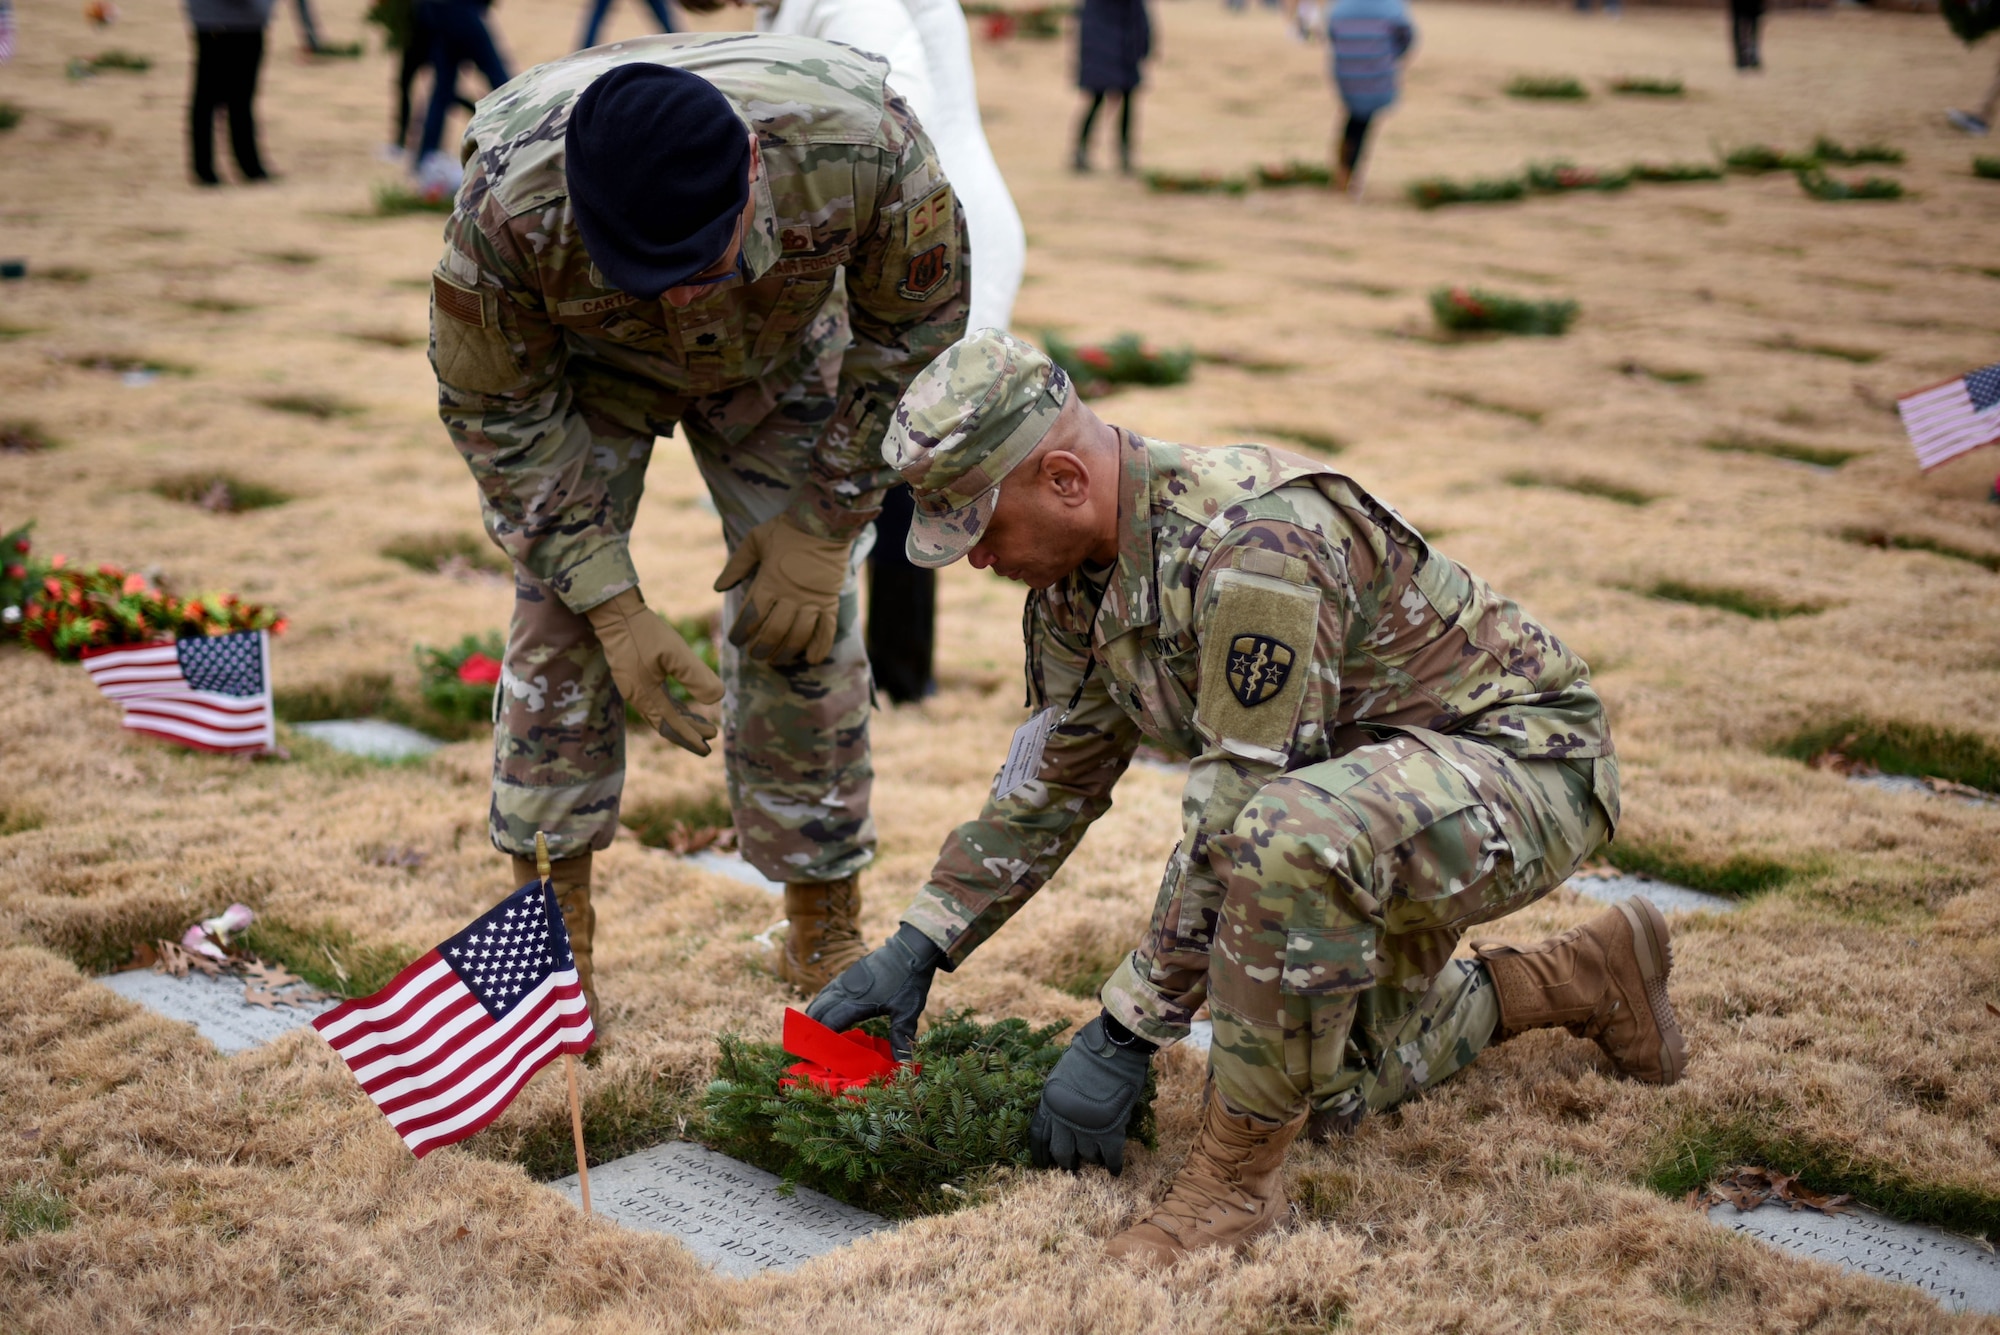 Lt. Col. Anthony Carter, 301st Fighter Wing Security Forces Squadron commander, and Lt. Col Angelo Carter, U.S. Army Reserve Medical Corps physician associate, lay a wreath for their father, Master Sgt. Algie Carter during a Wreaths Across America event at the Dallas-Fort Worth National Cemetery on Dec. 18, 2021. This even is a chance for many families to honor their loved ones that served as veterans. (U.S. Air Force photo by Staff Sgt. Randall Moose)